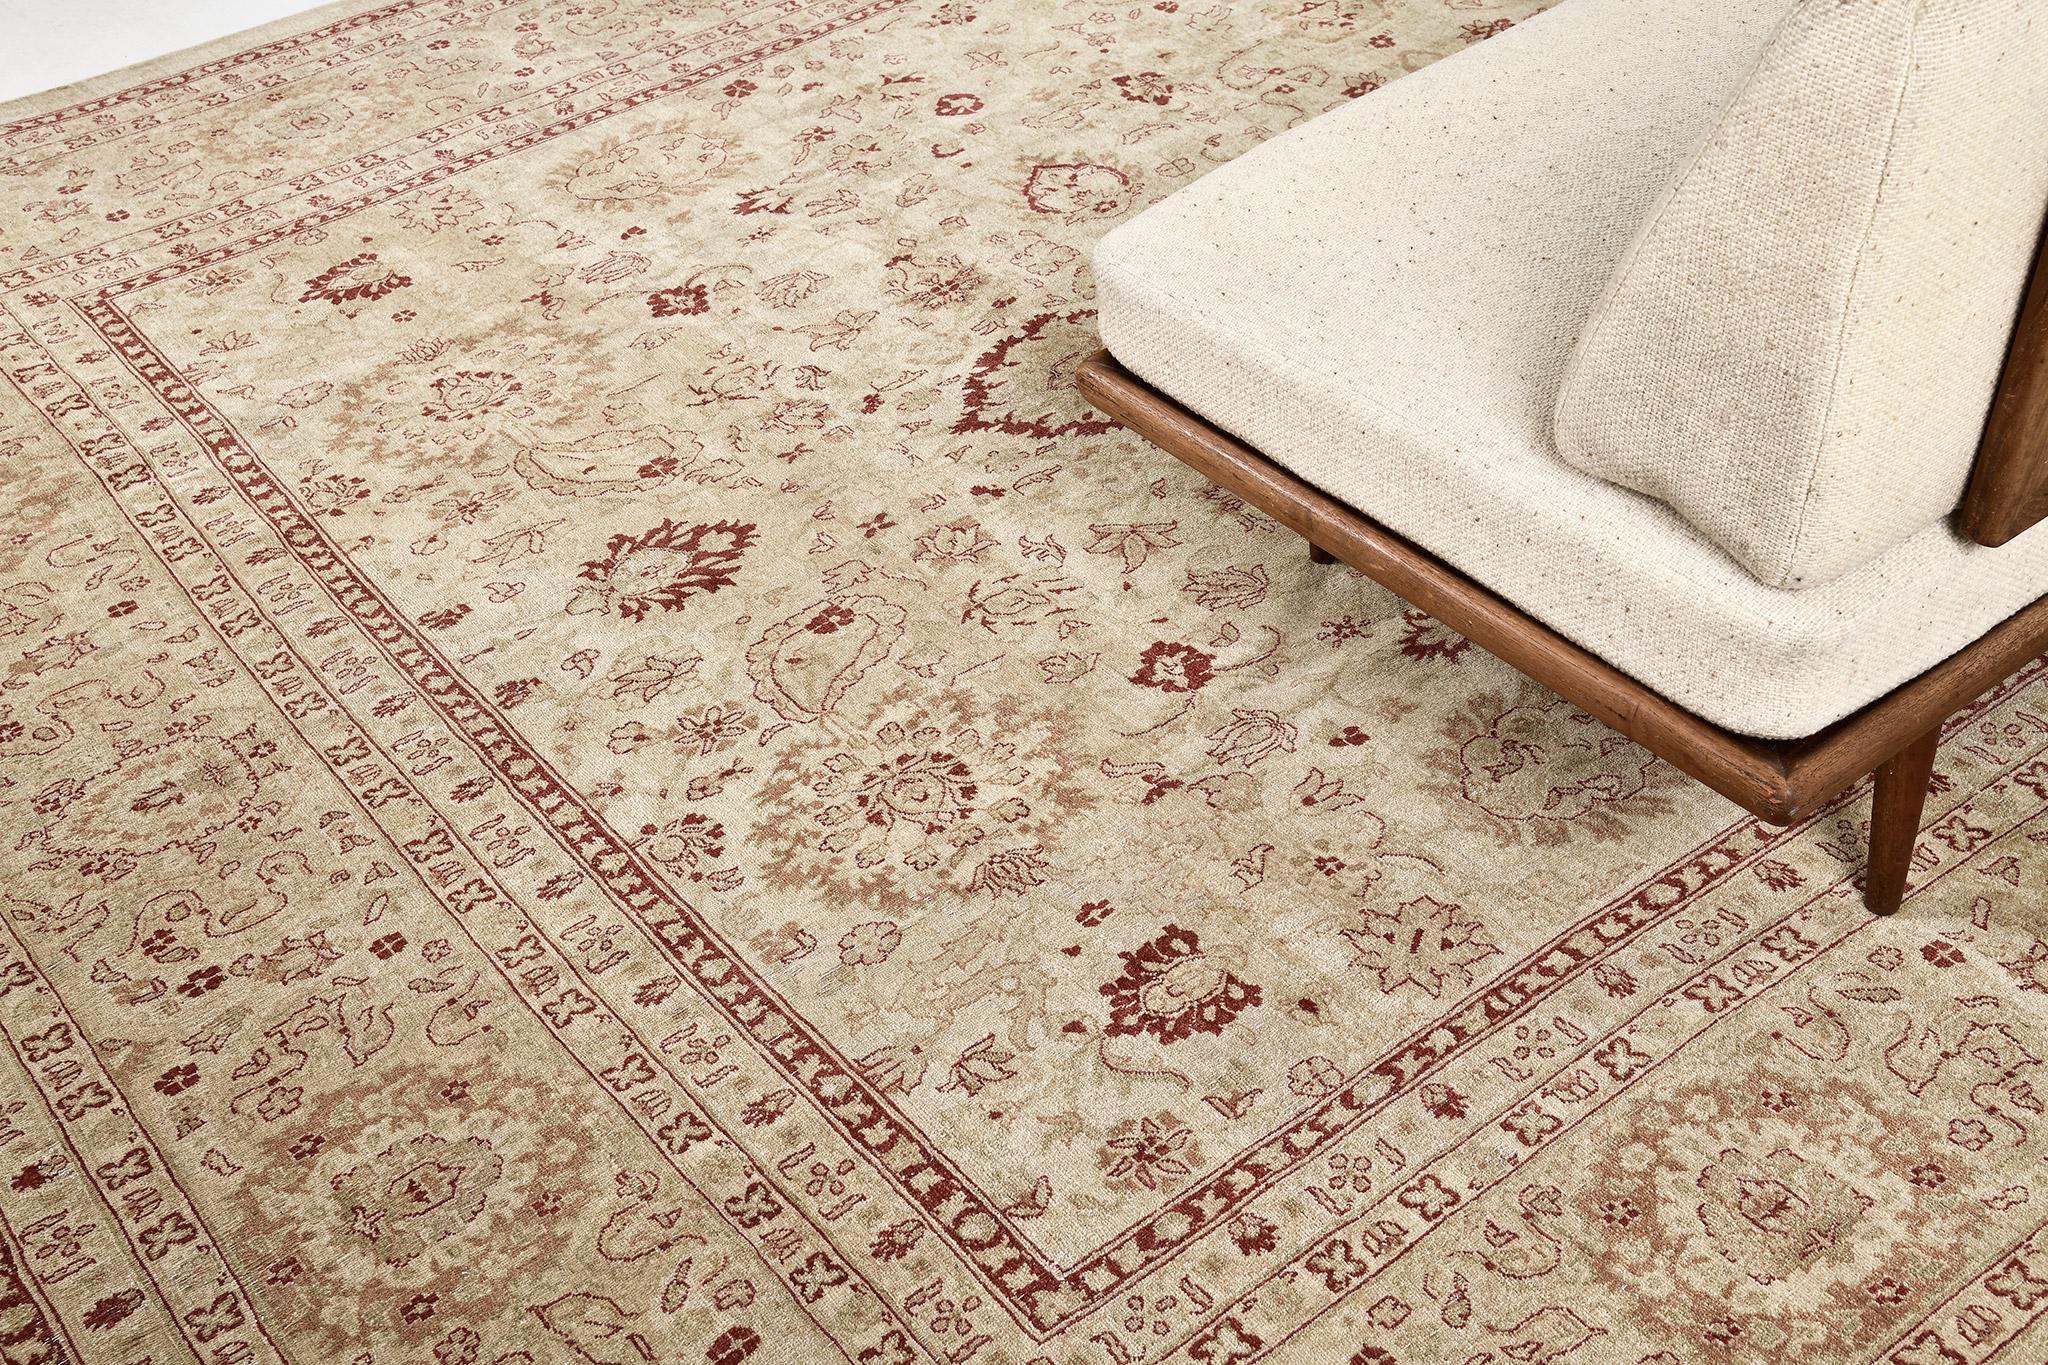 An extraordinary revival rug in our Fable Collection that features delicate stylish floral patterns. Featuring the elaborate vine scrolls and various florid elements in the warm tones of sand, scarlet and gold, this magnificent rug exudes abundance